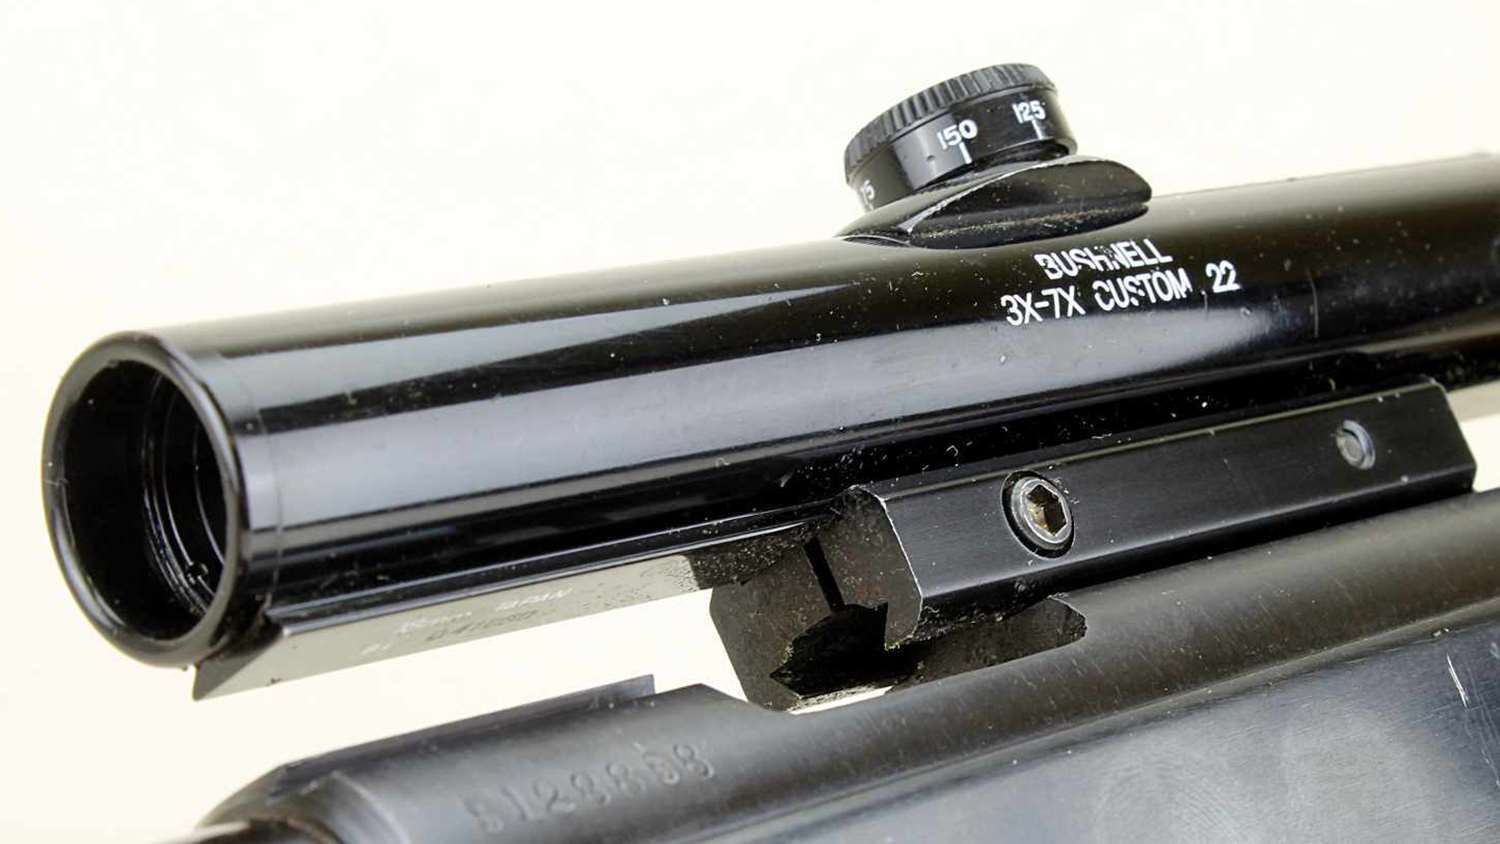 Mossberg’s tip-off concept spawned some new ideas, such as this Bushnell scope with a dovetail rail that mirrors a .22’s receiver grooves. A special mount sinks “claws” into both the scope rail and the receiver grooves